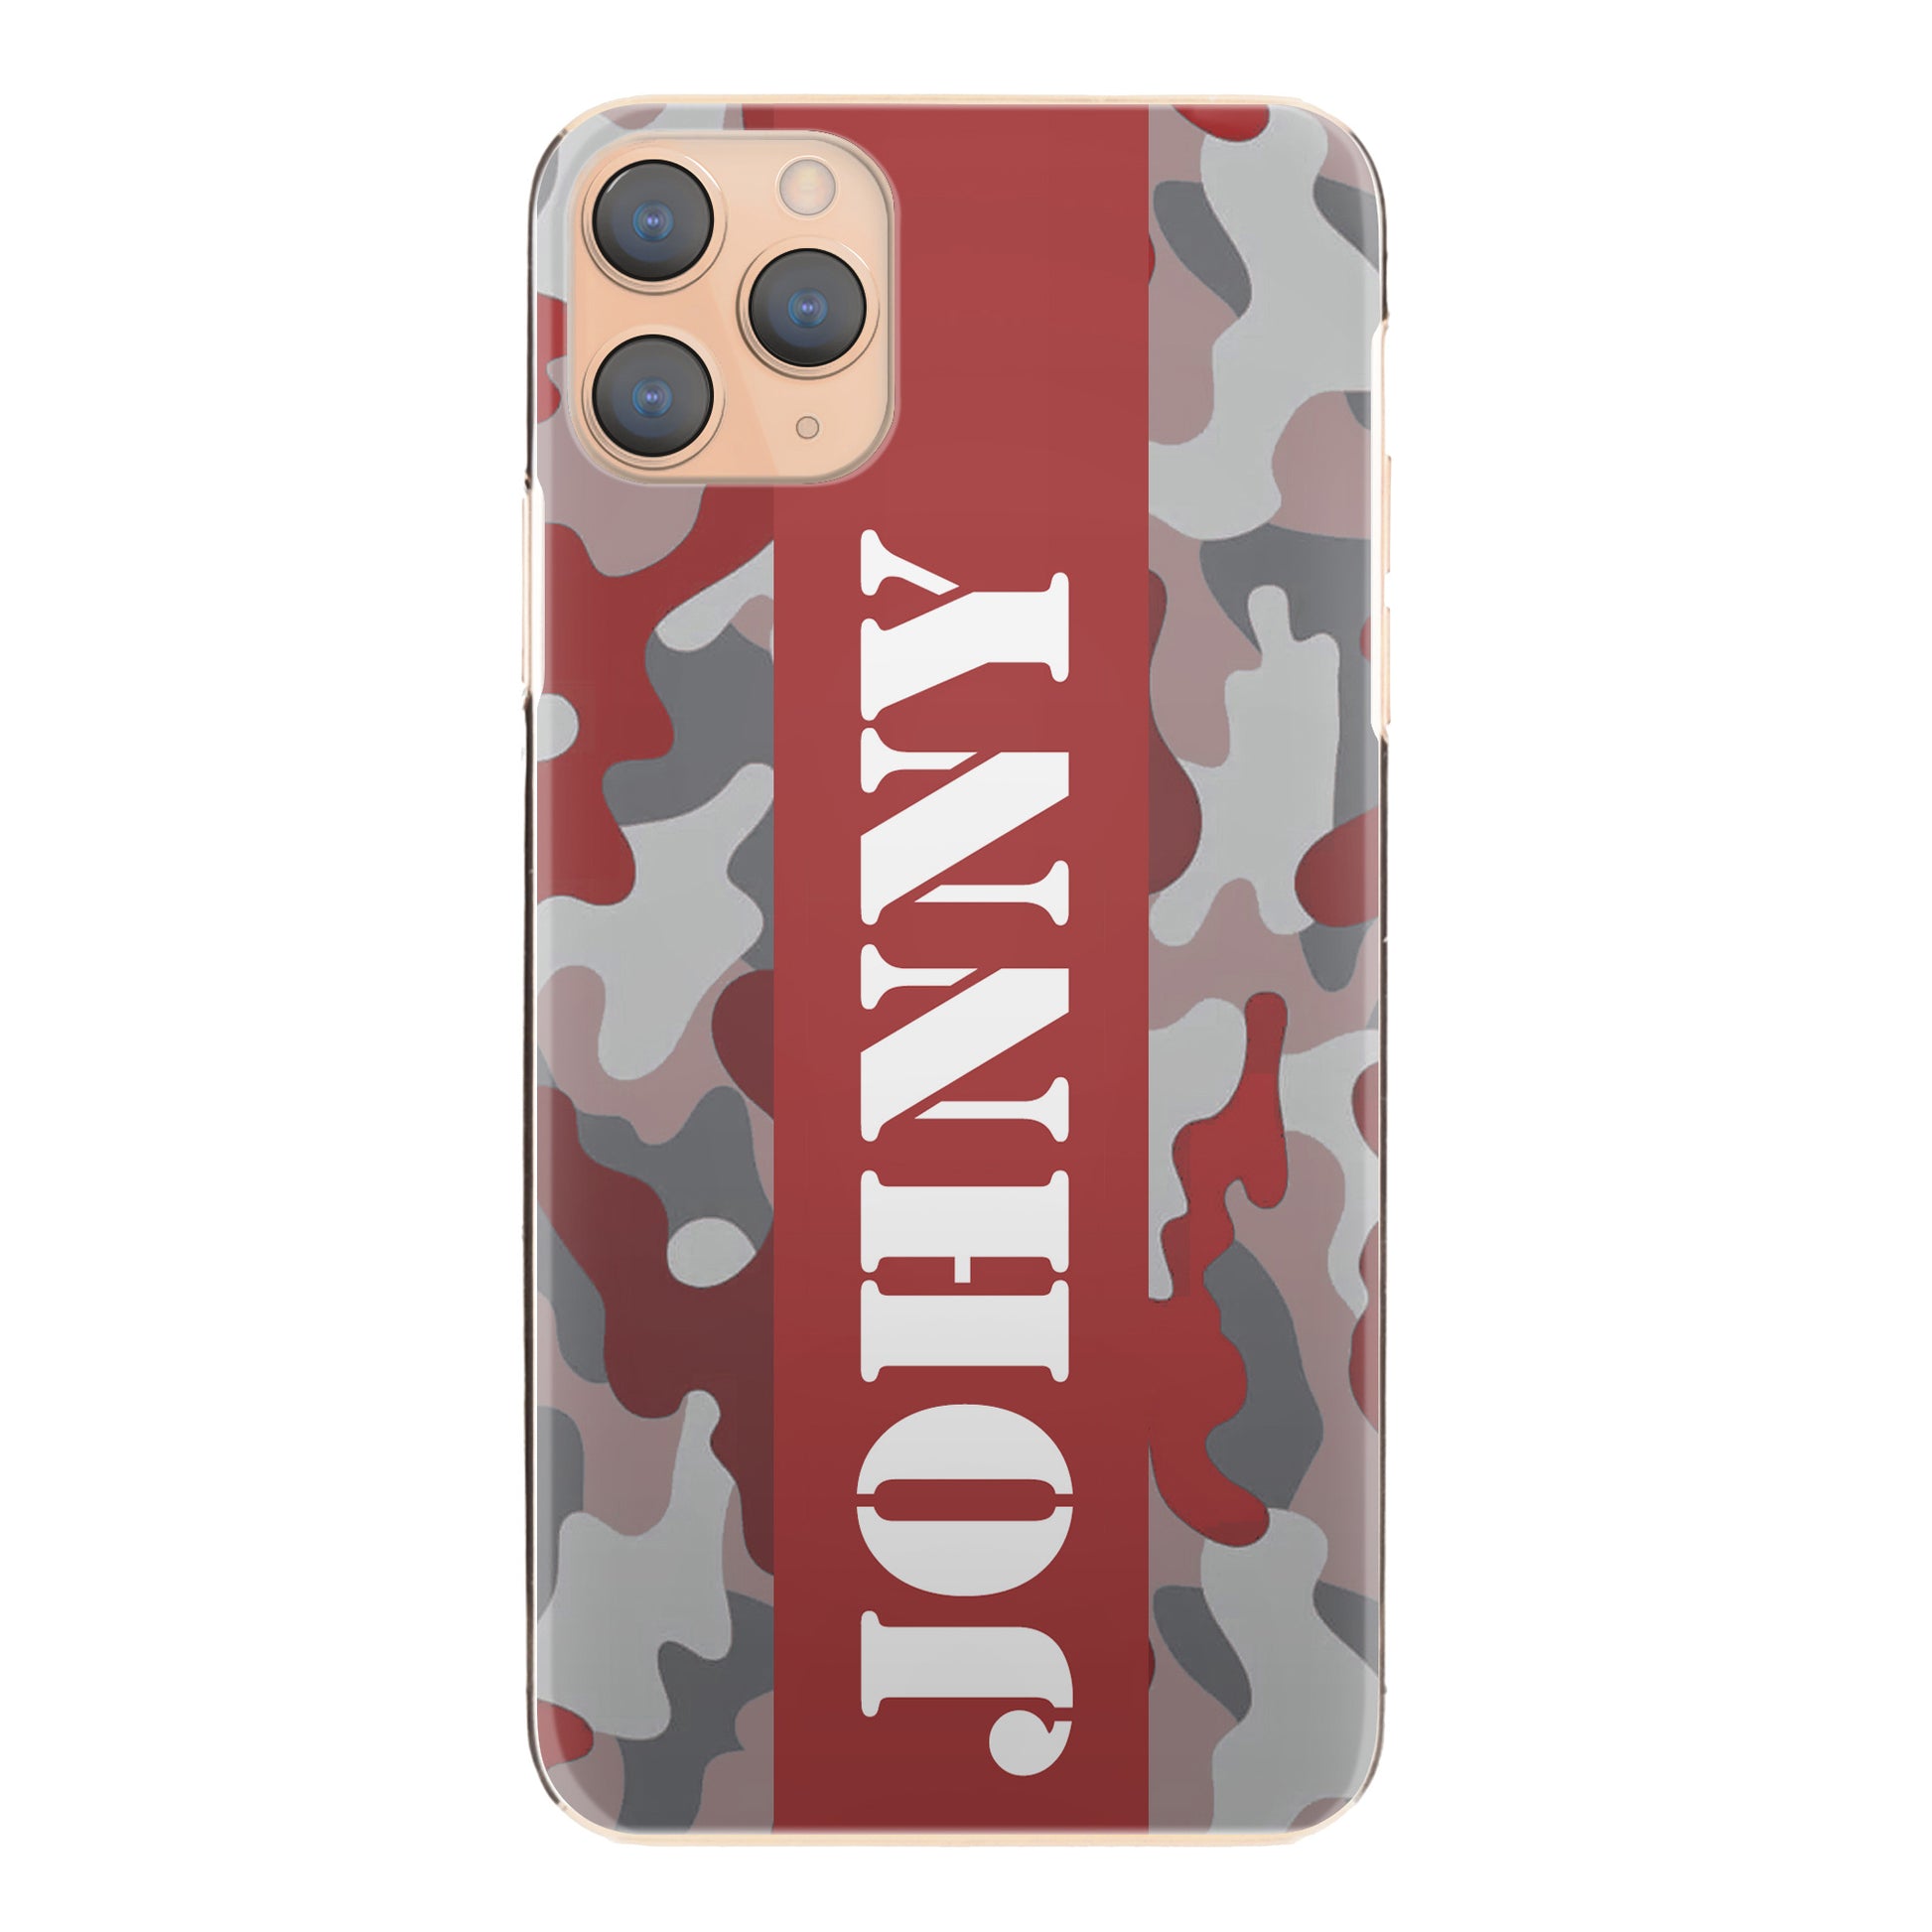 Personalised One Phone Hard Case with Military Text on Red Camo